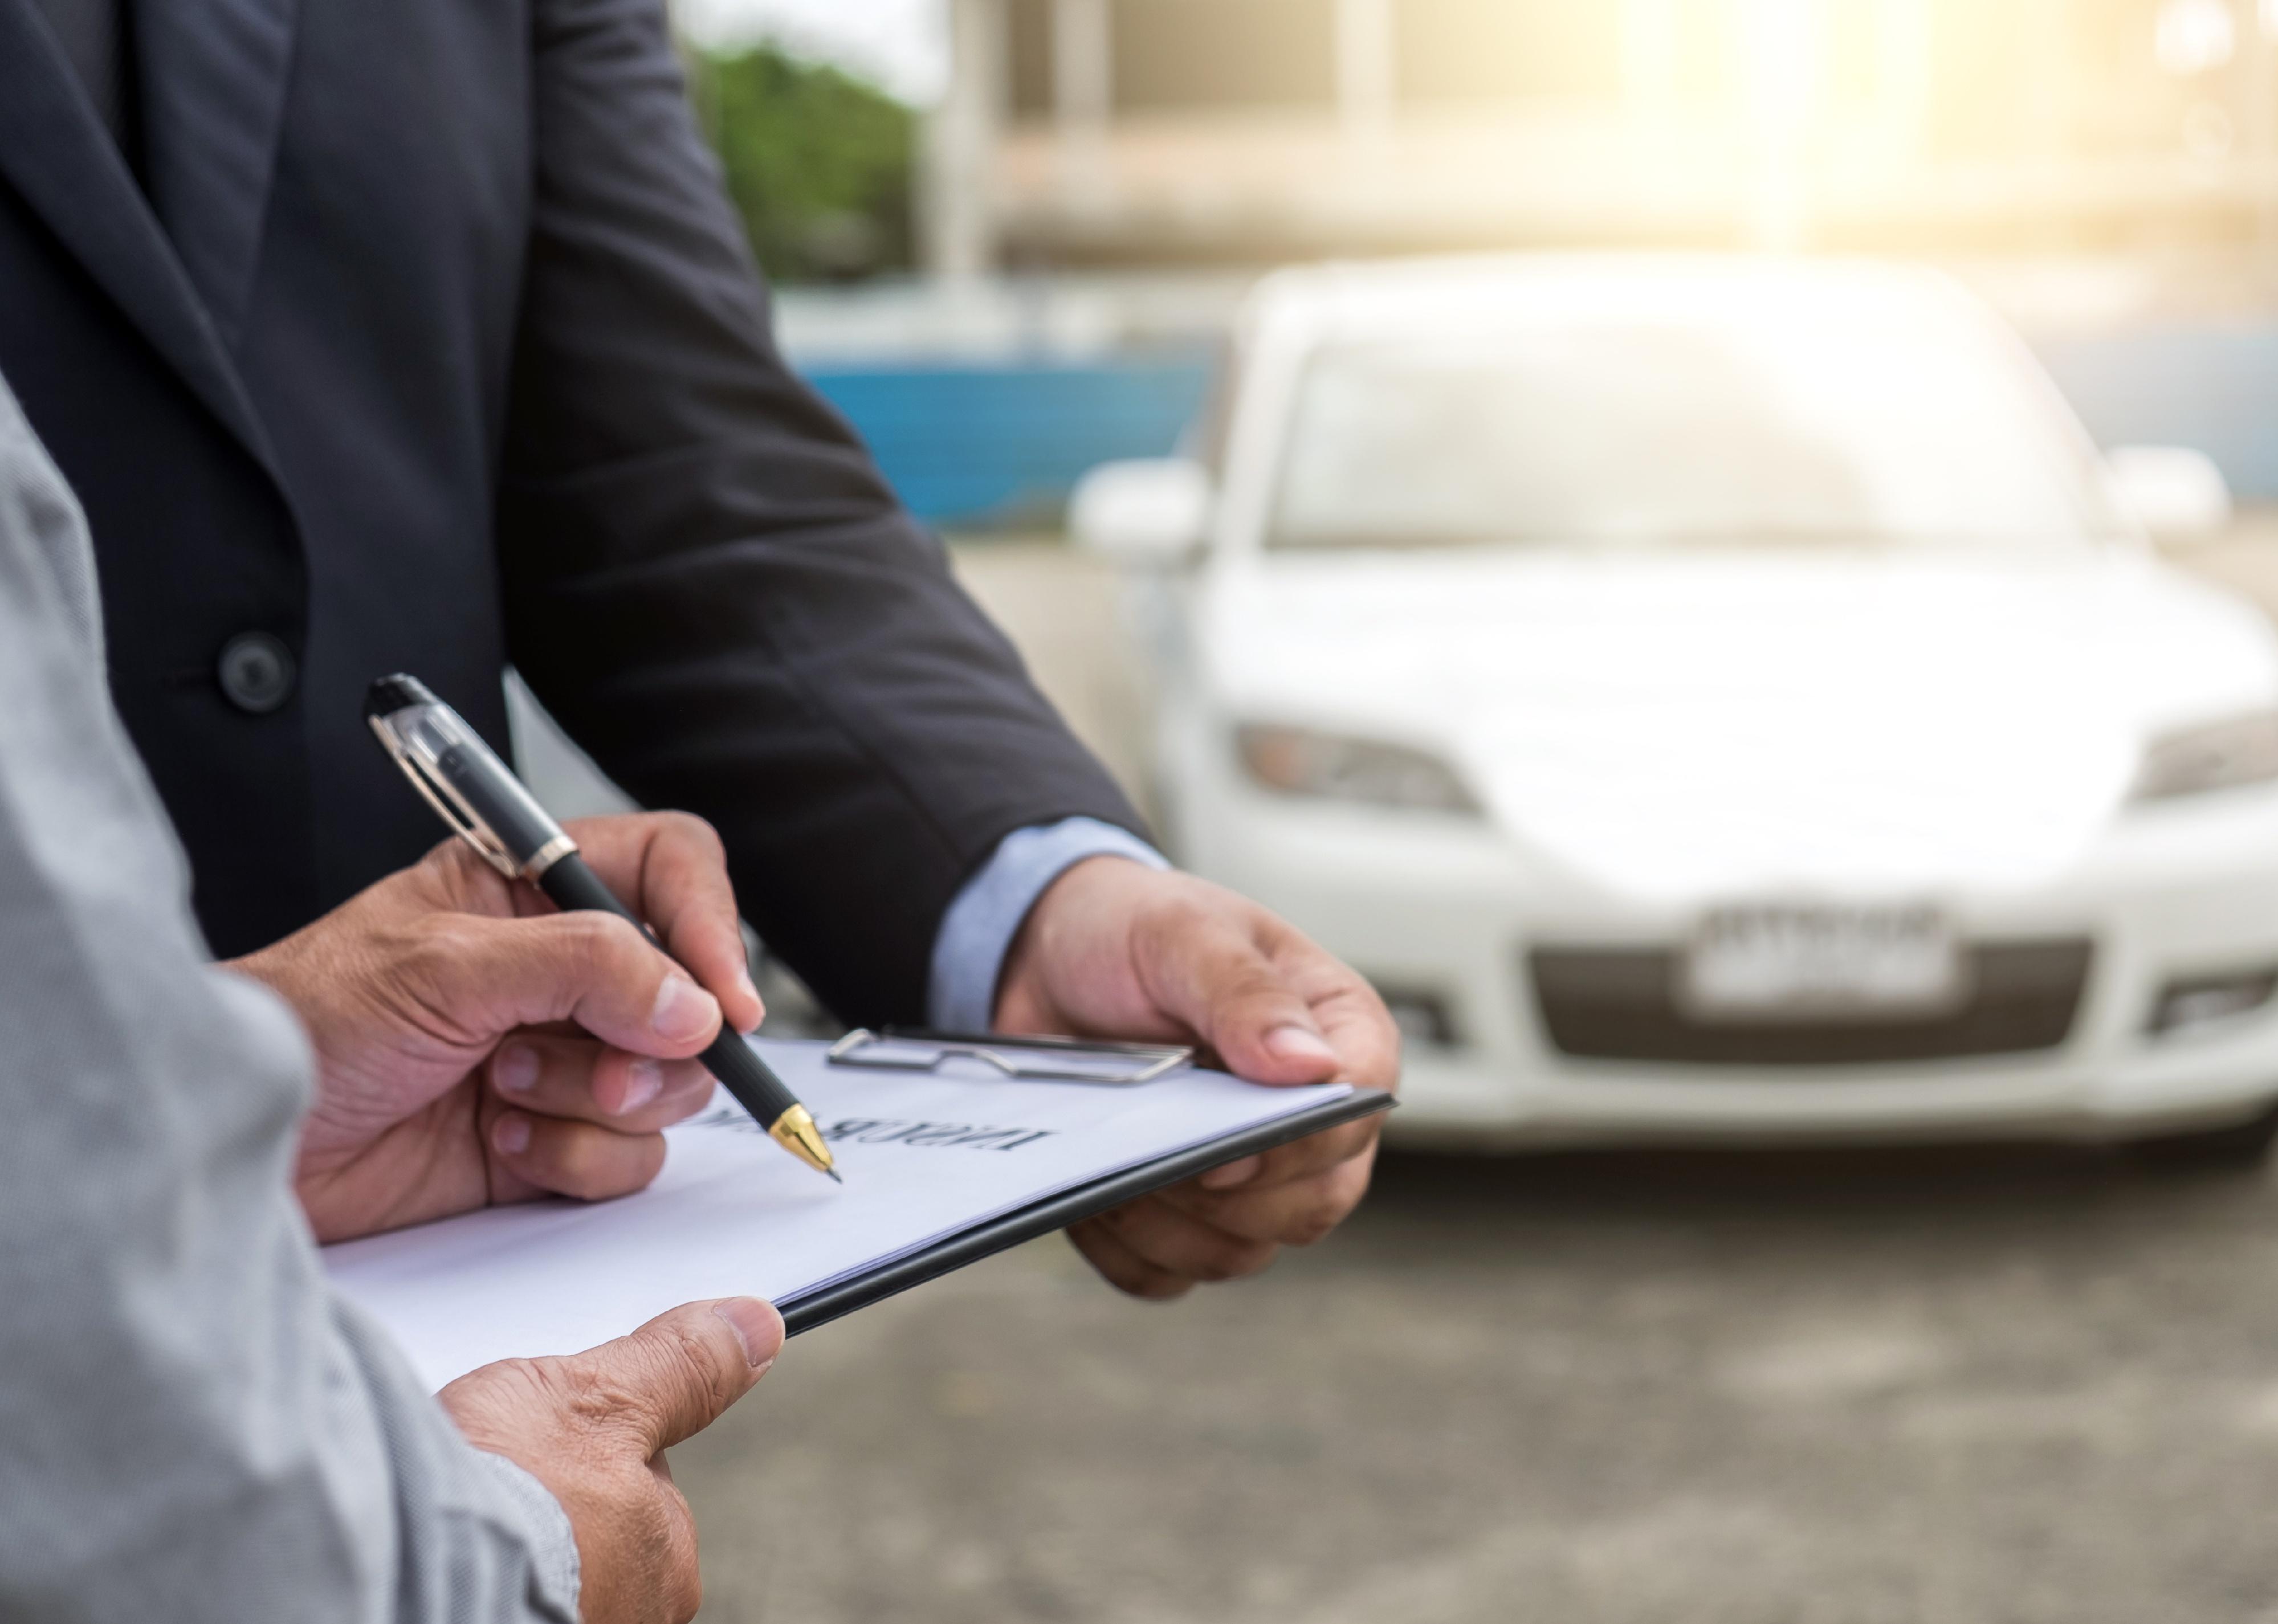 The insurance agent examines the car and the client signs the claim form